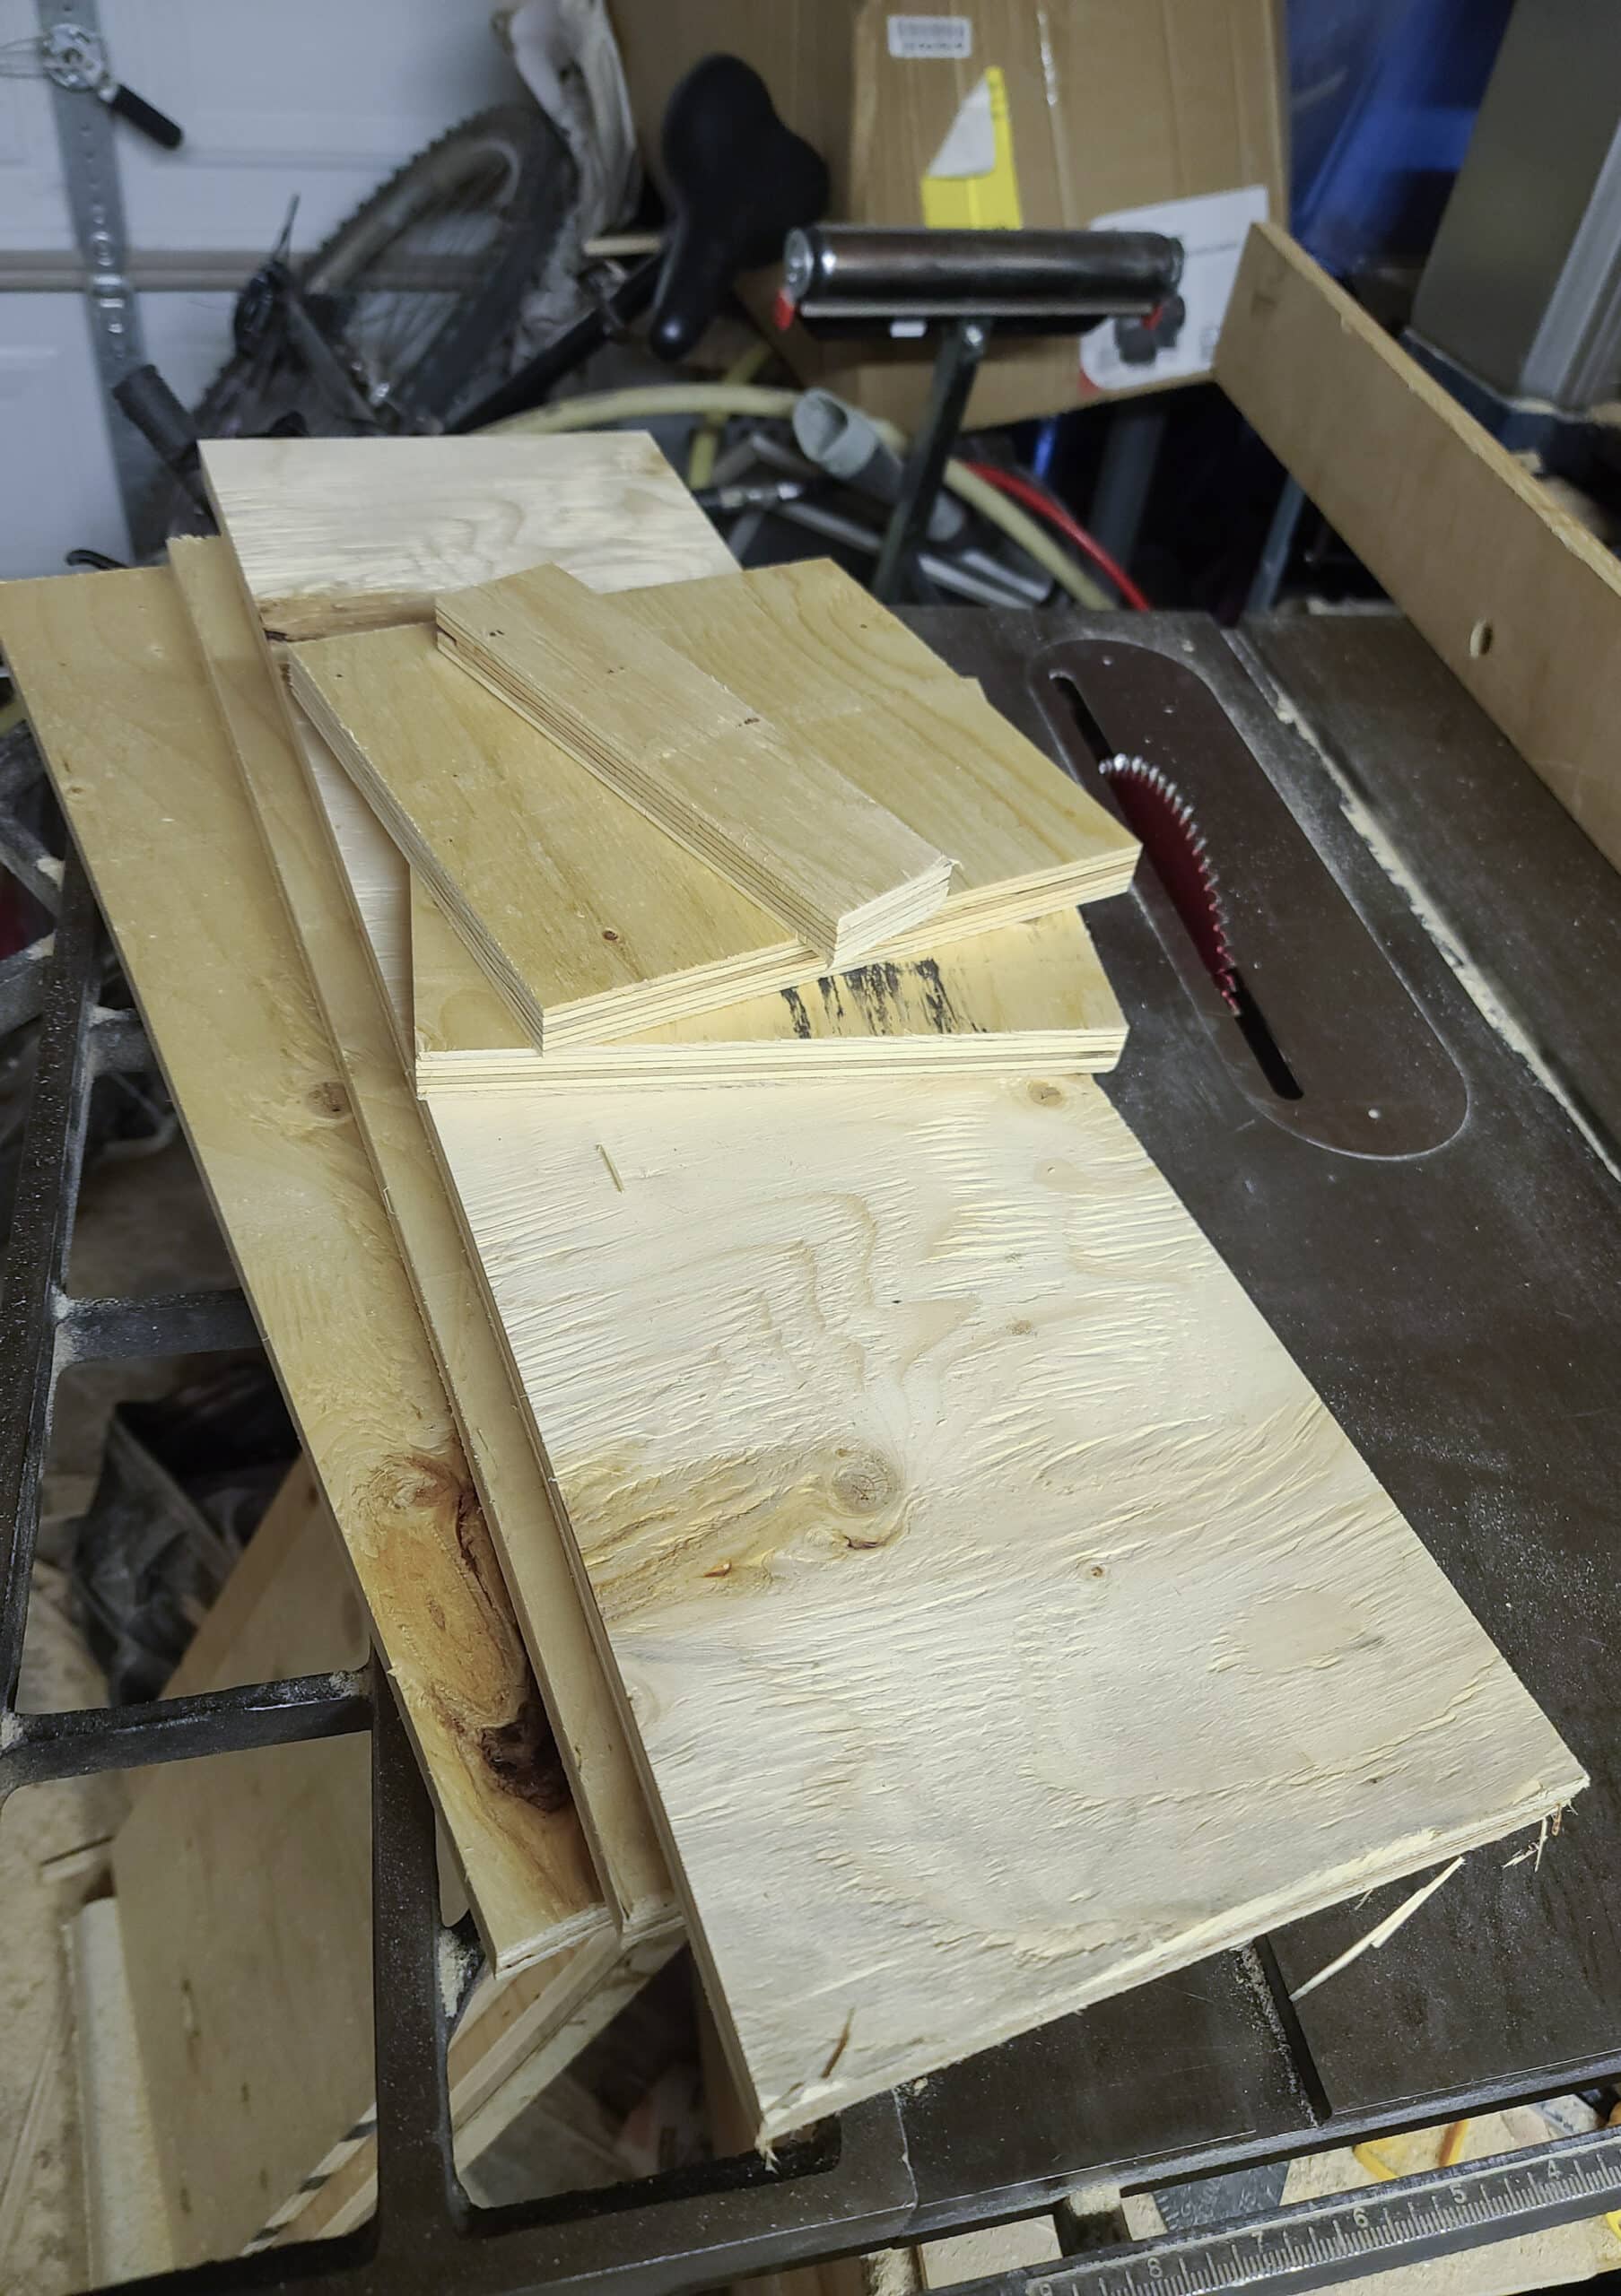 A small pile of cut out plywood boards on top of a table saw.